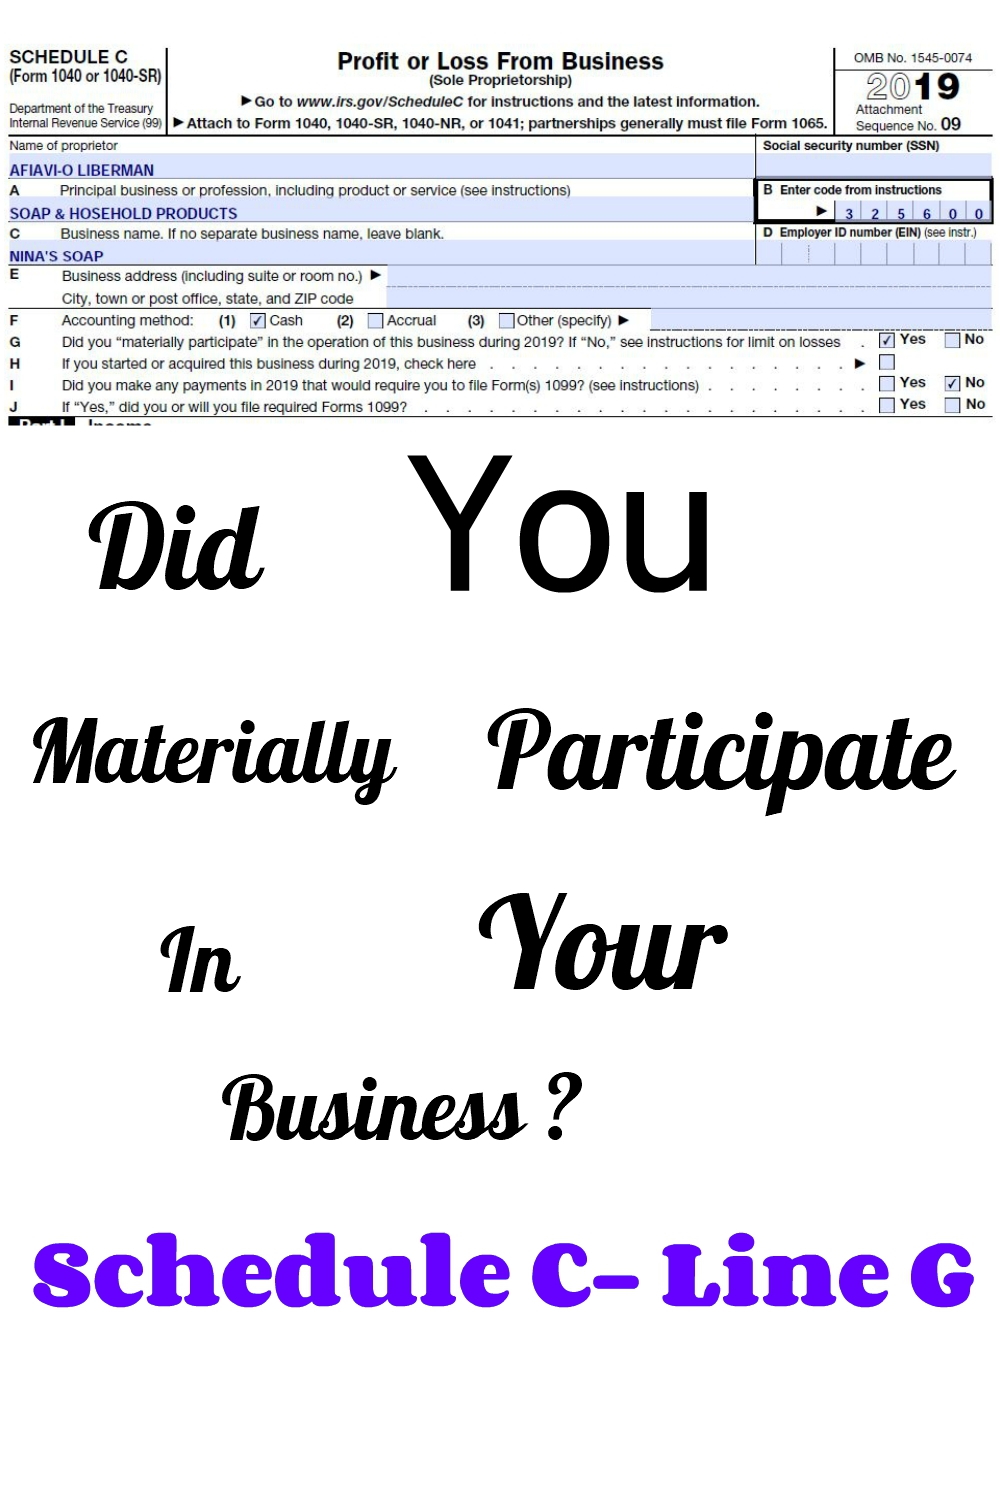 Did You Materially Participate in Your Business? 2019 Schedule C Form 1040-Line G – Nina's Soap